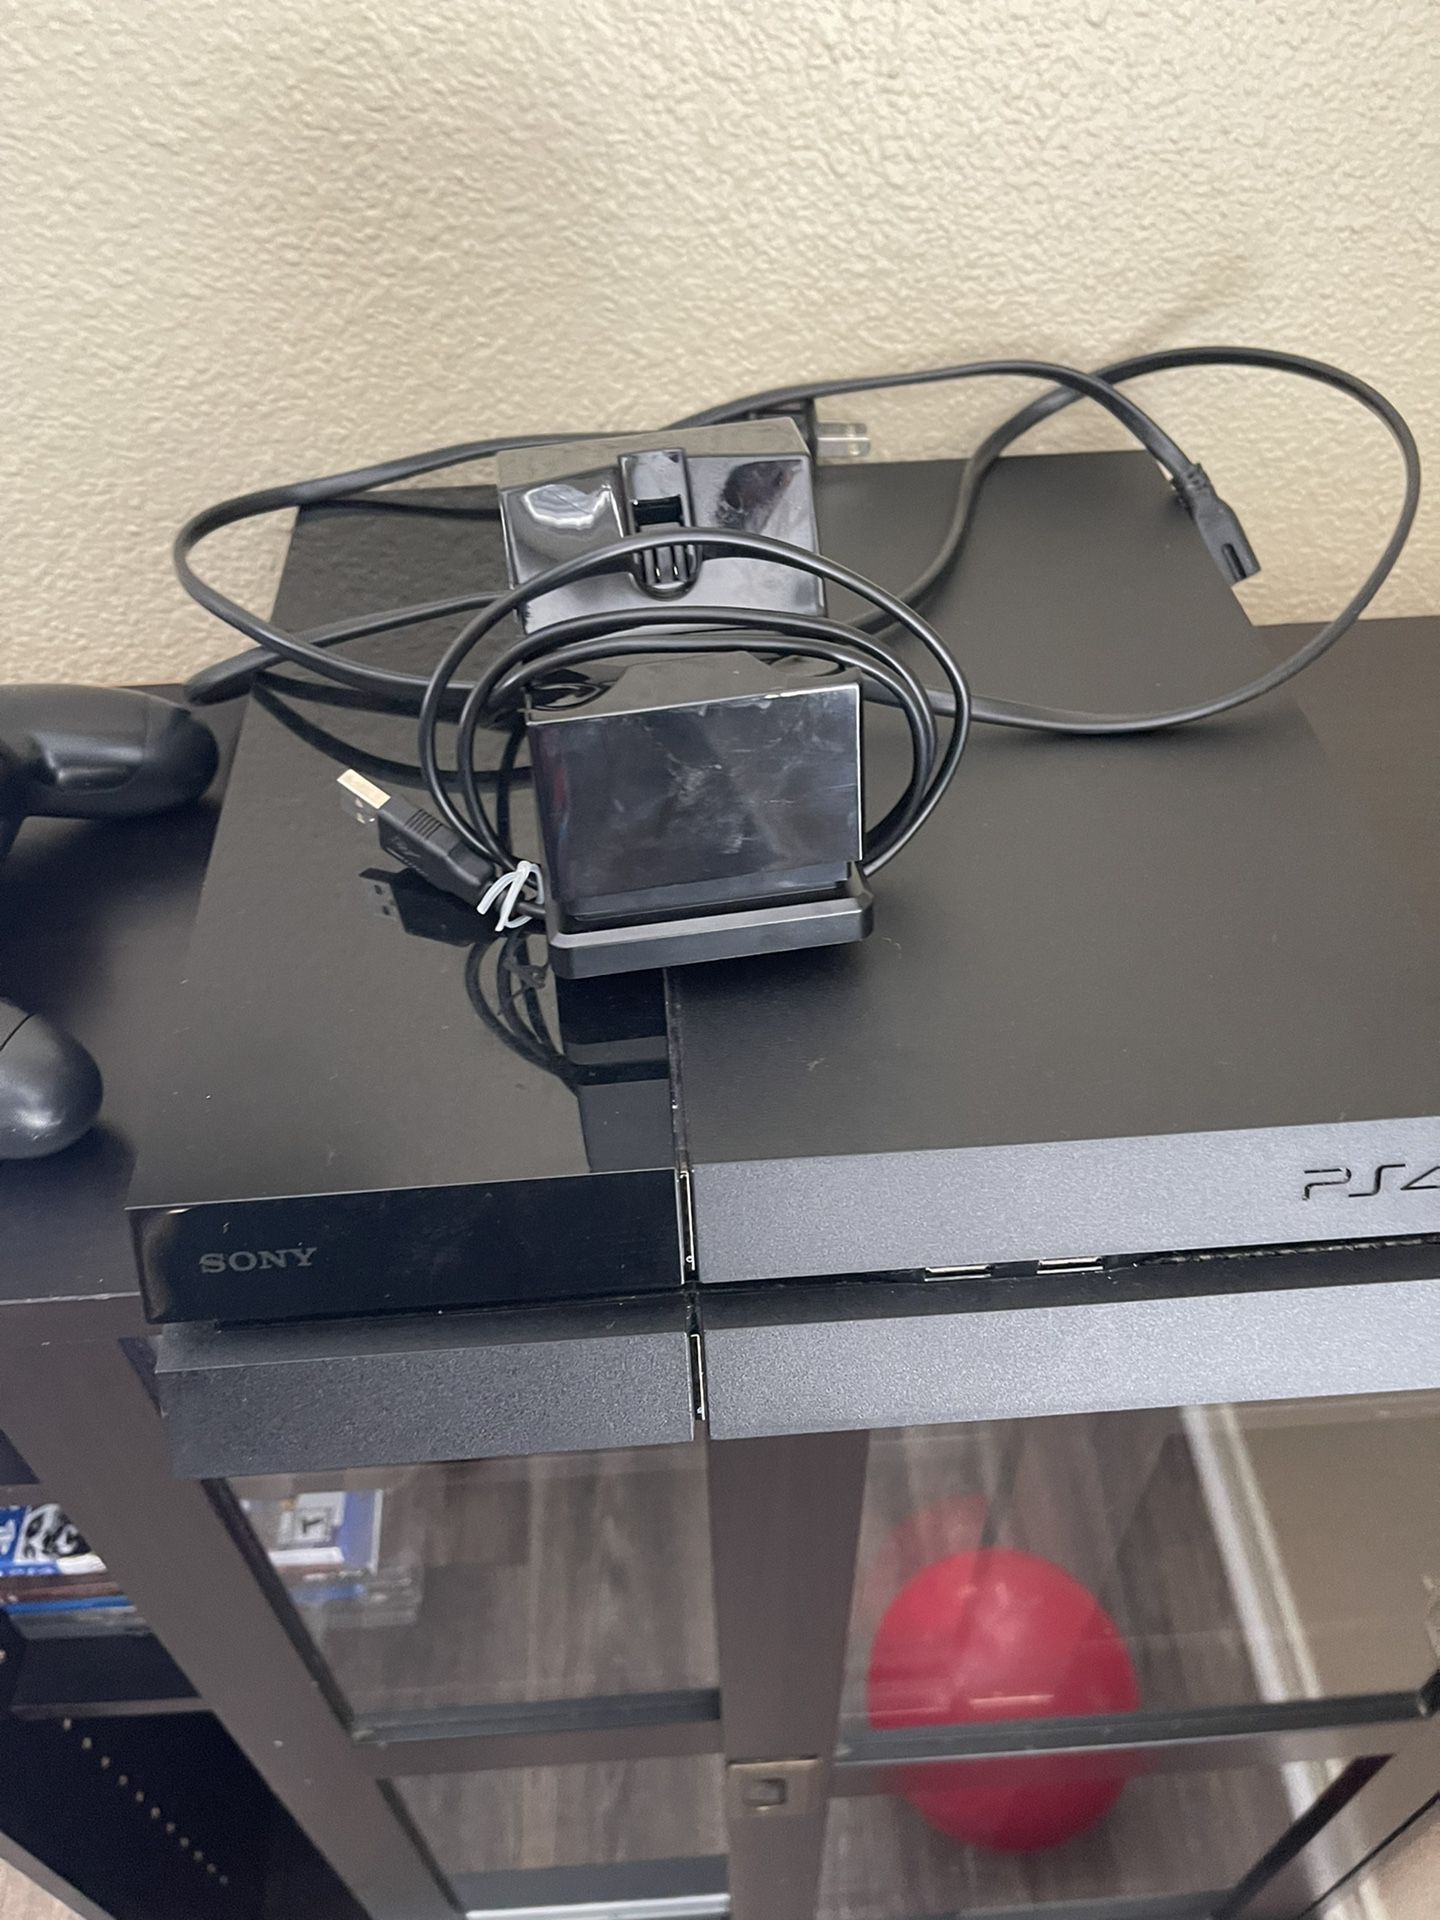 Selling My Ps4